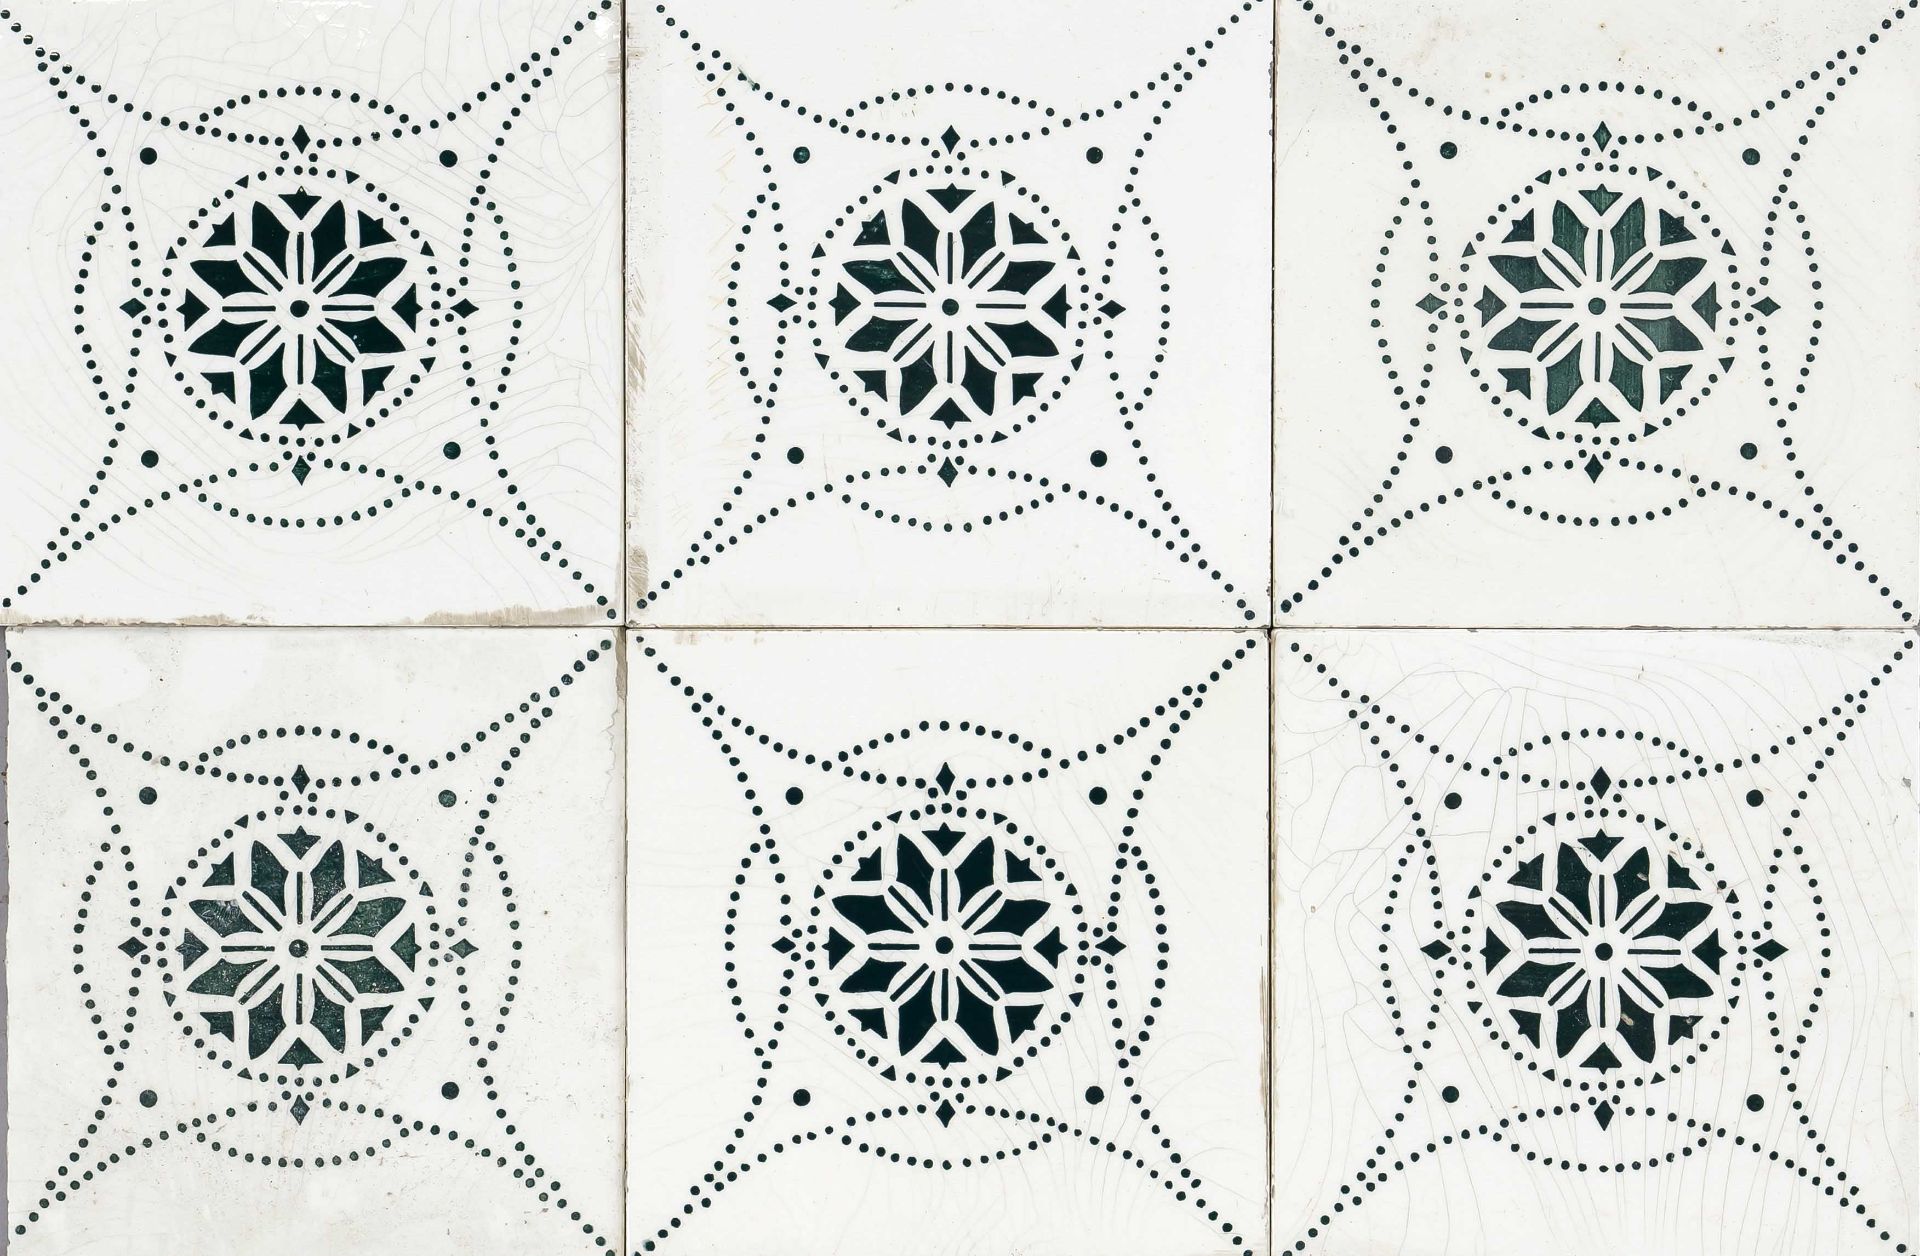 67 Tiles, early 20th century, dark green repeat on a cross star base with stylized flowers, slightly